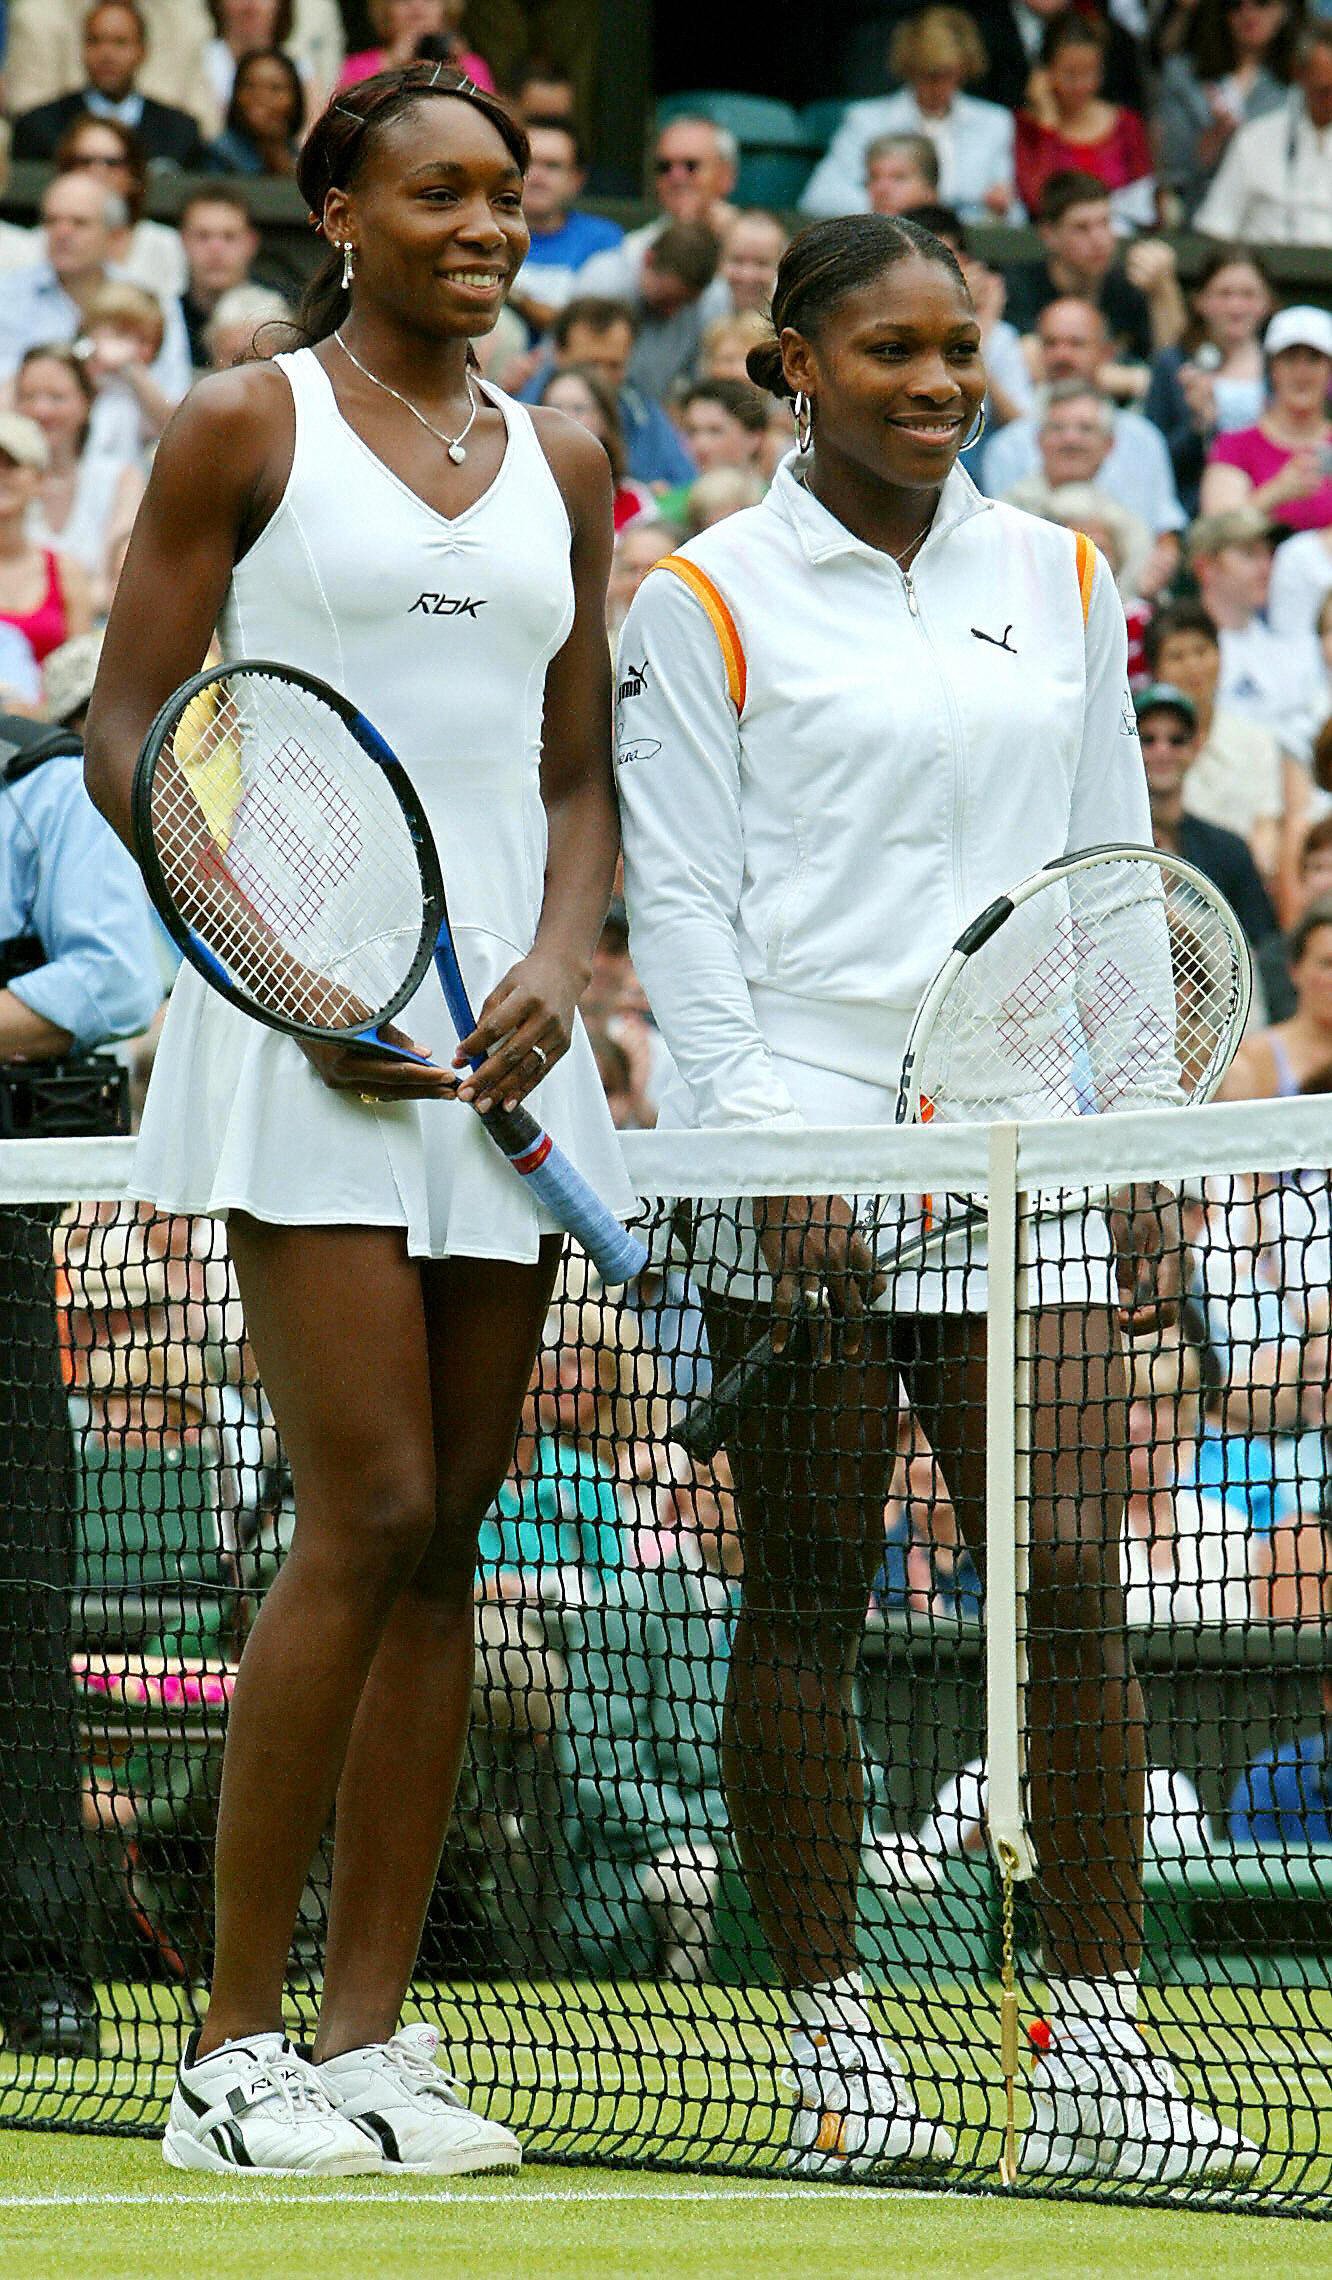 Venus and Serena Williams before their game at the Wimbledon Tennis Championship in South London, England | Source: Getty Images 